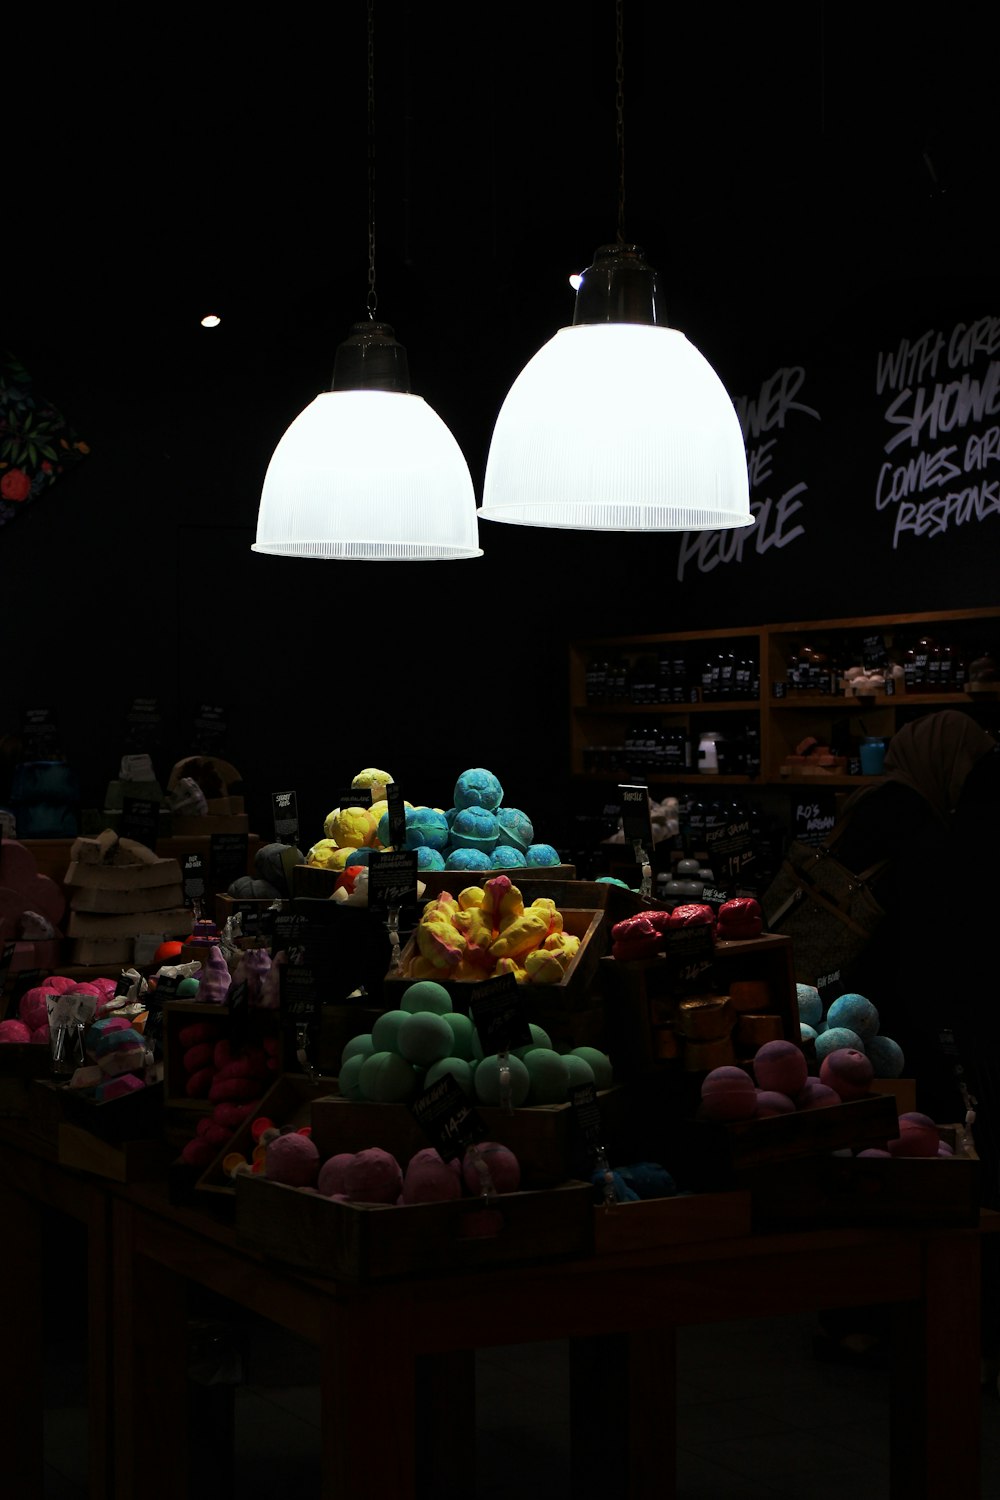 variety of pastries with turned on pendant lamps